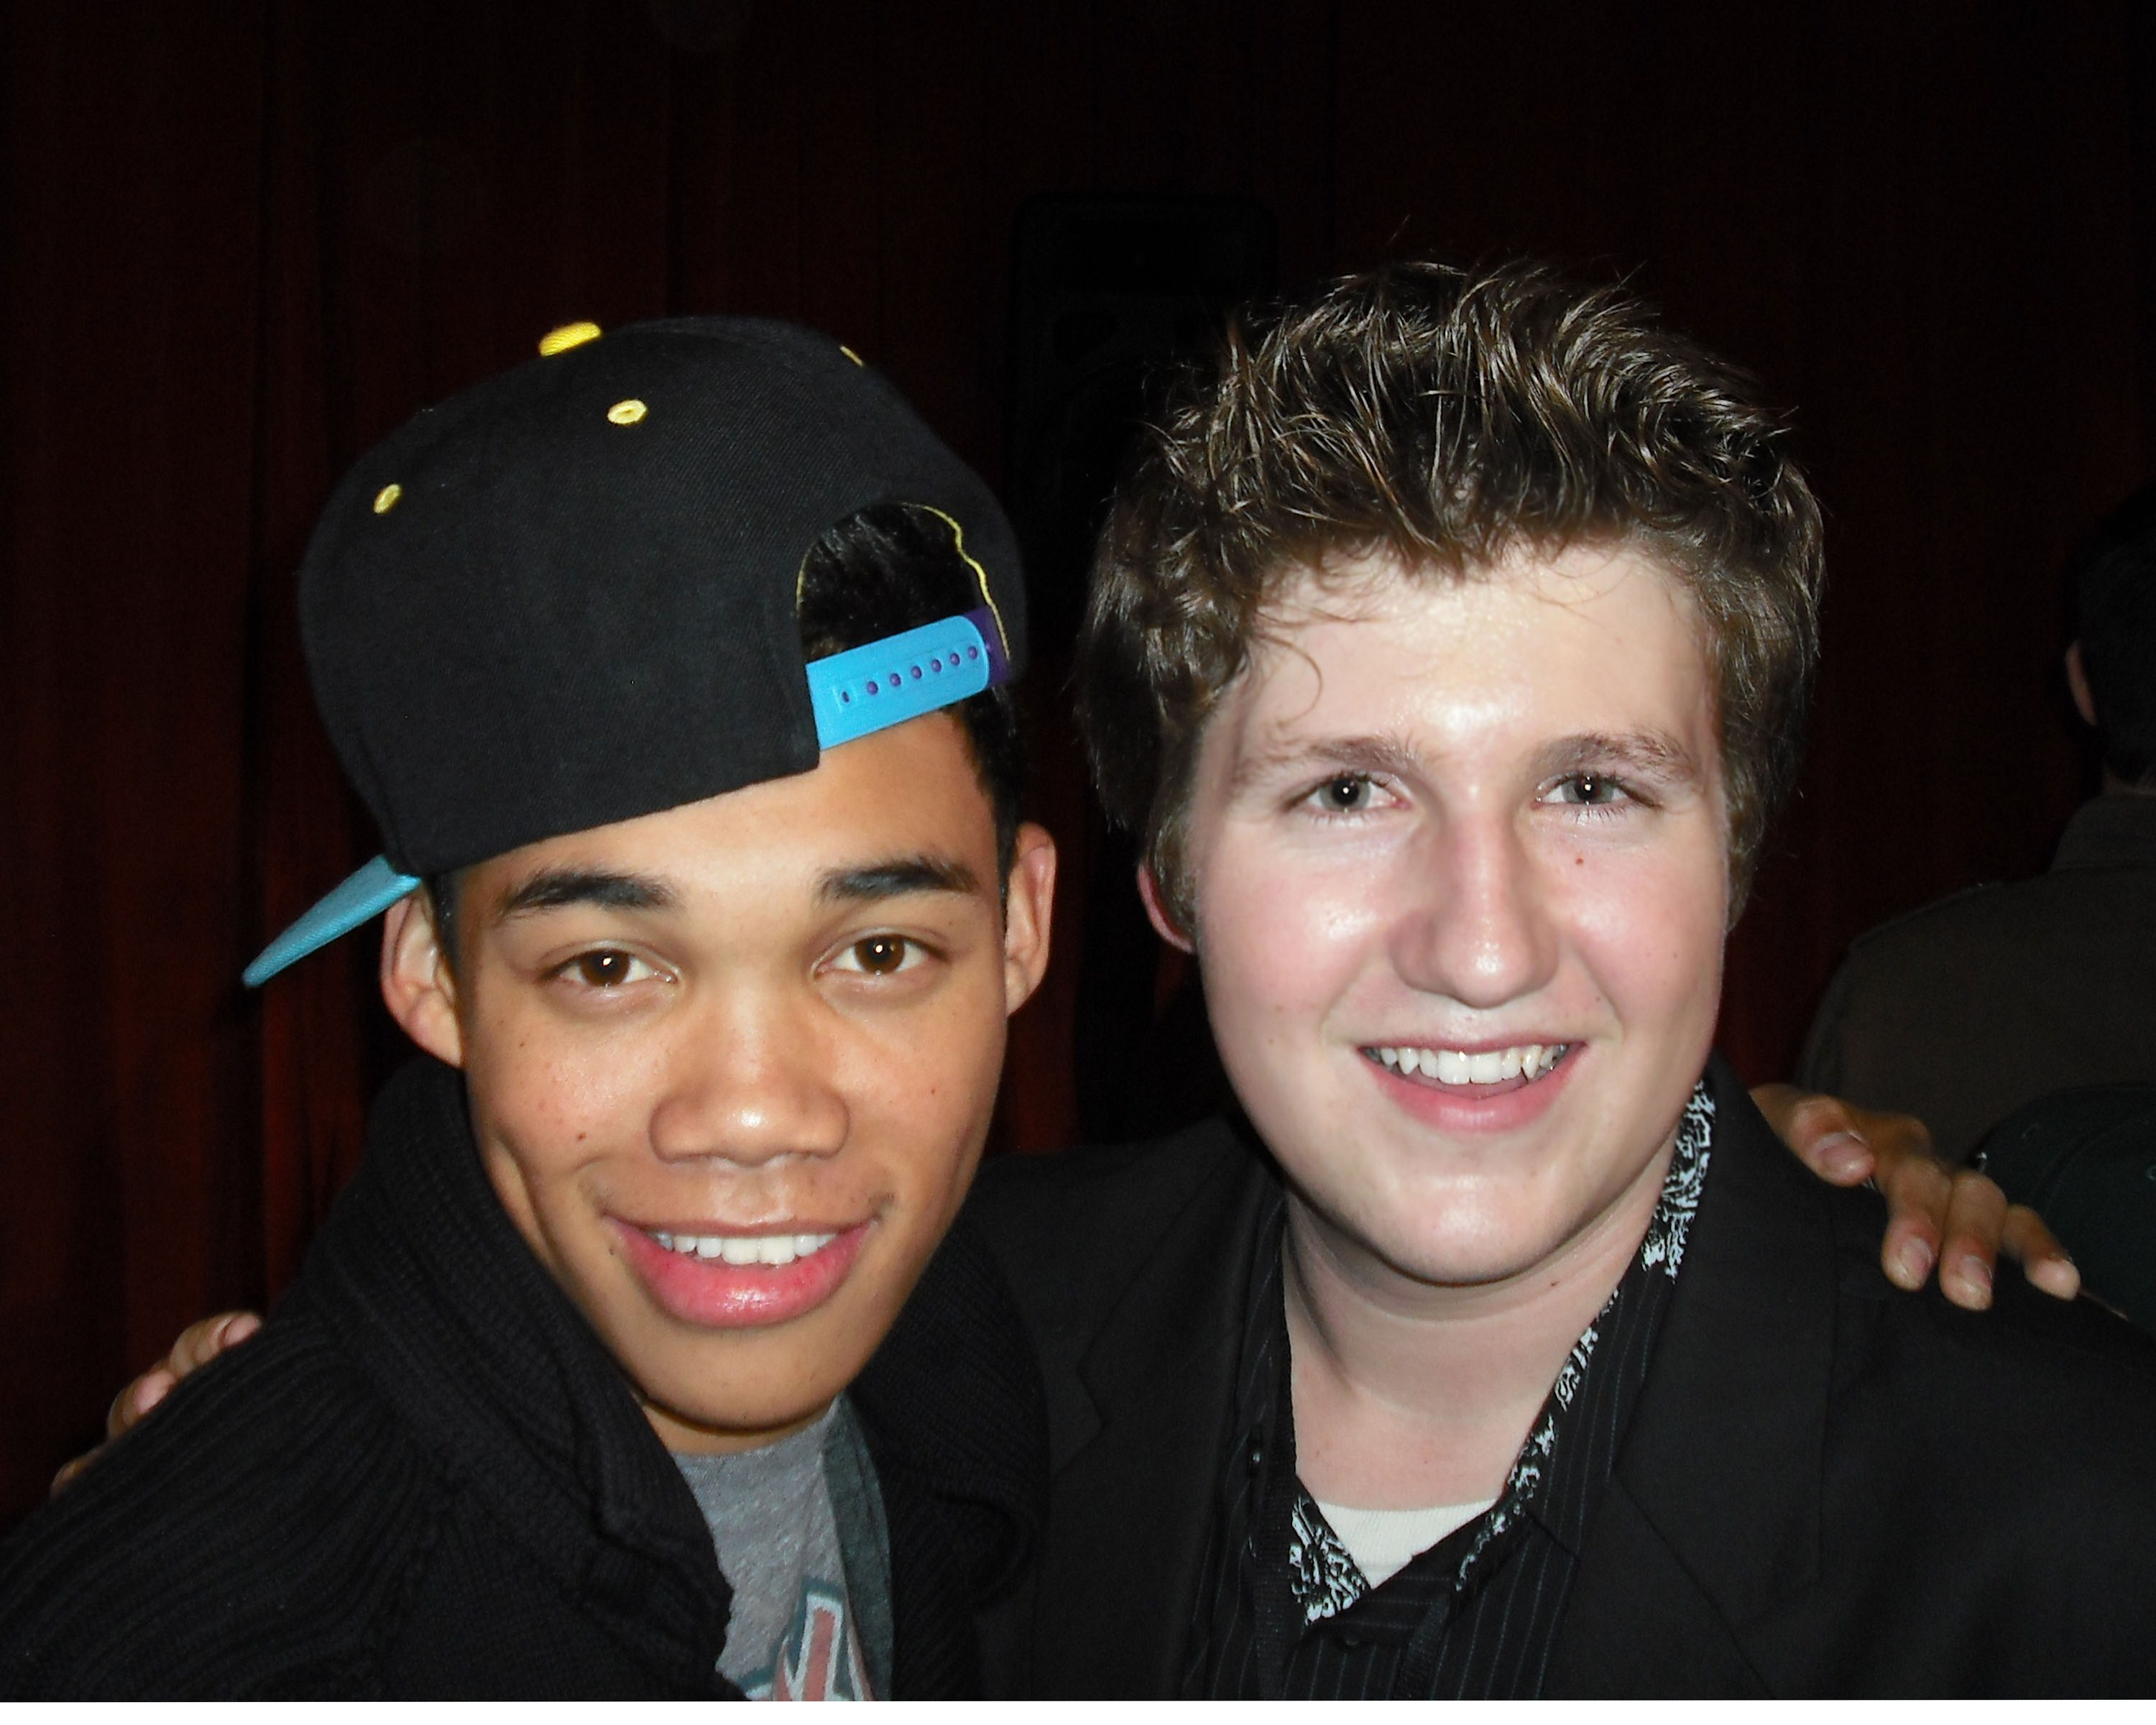 David Buehrle with Disney's Shake It Up's, Roshon Fegan at The Muppet's Premiere and After Party.